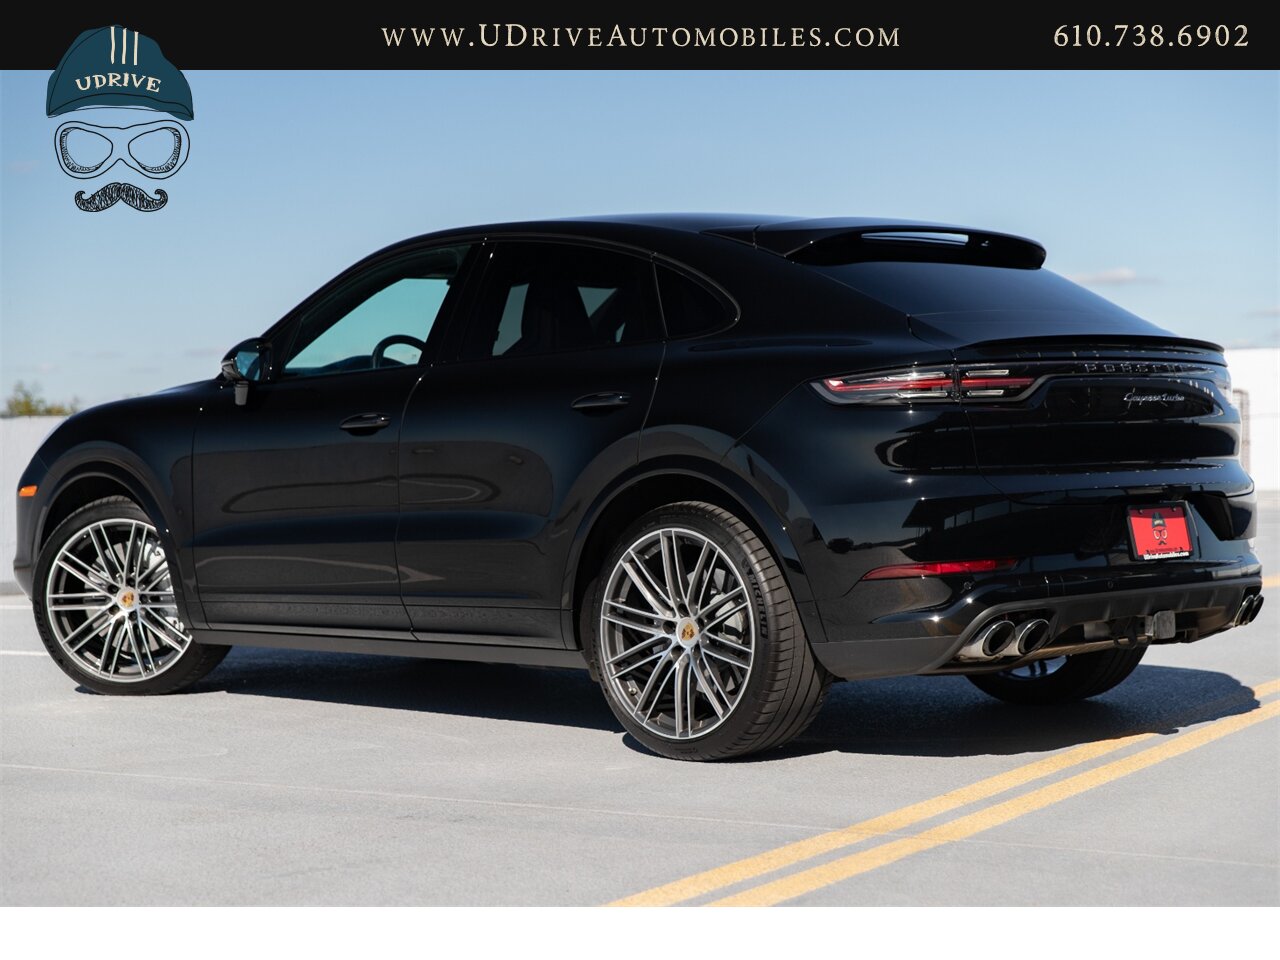 2020 Porsche Cayenne Turbo Coupe 2+1 Rear Comf Seats Prem Plus  22in Turbo Design Whls Sport Exhst Adap Cruise Surround View - Photo 5 - West Chester, PA 19382